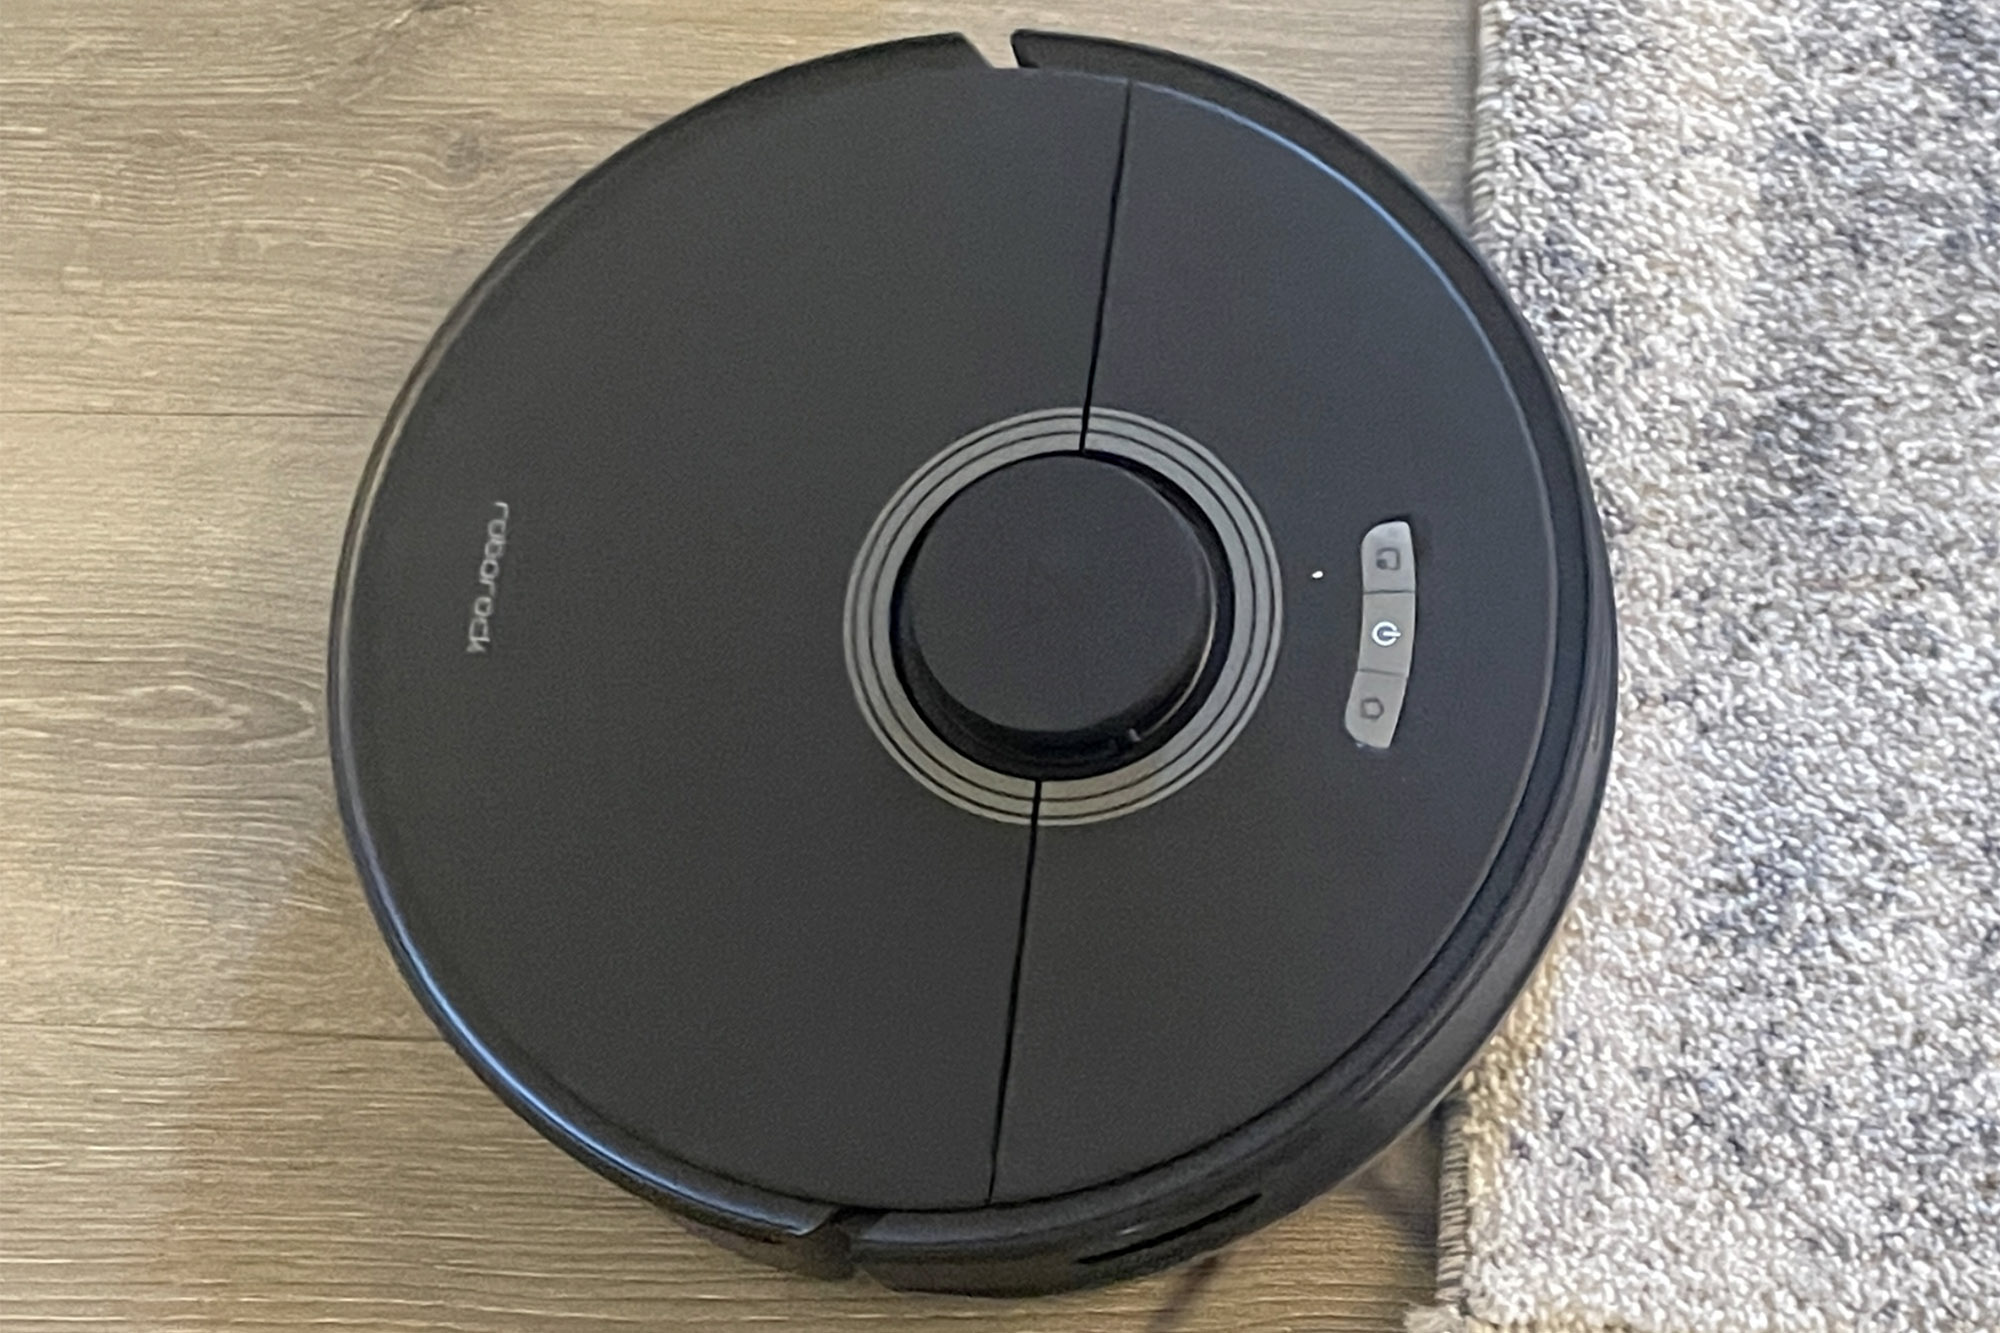 Roborock Q7 Max / Q7 Max Plus Robot Vacuum Cleaner Upgraded for S5 Max 3D  Mapping Smart